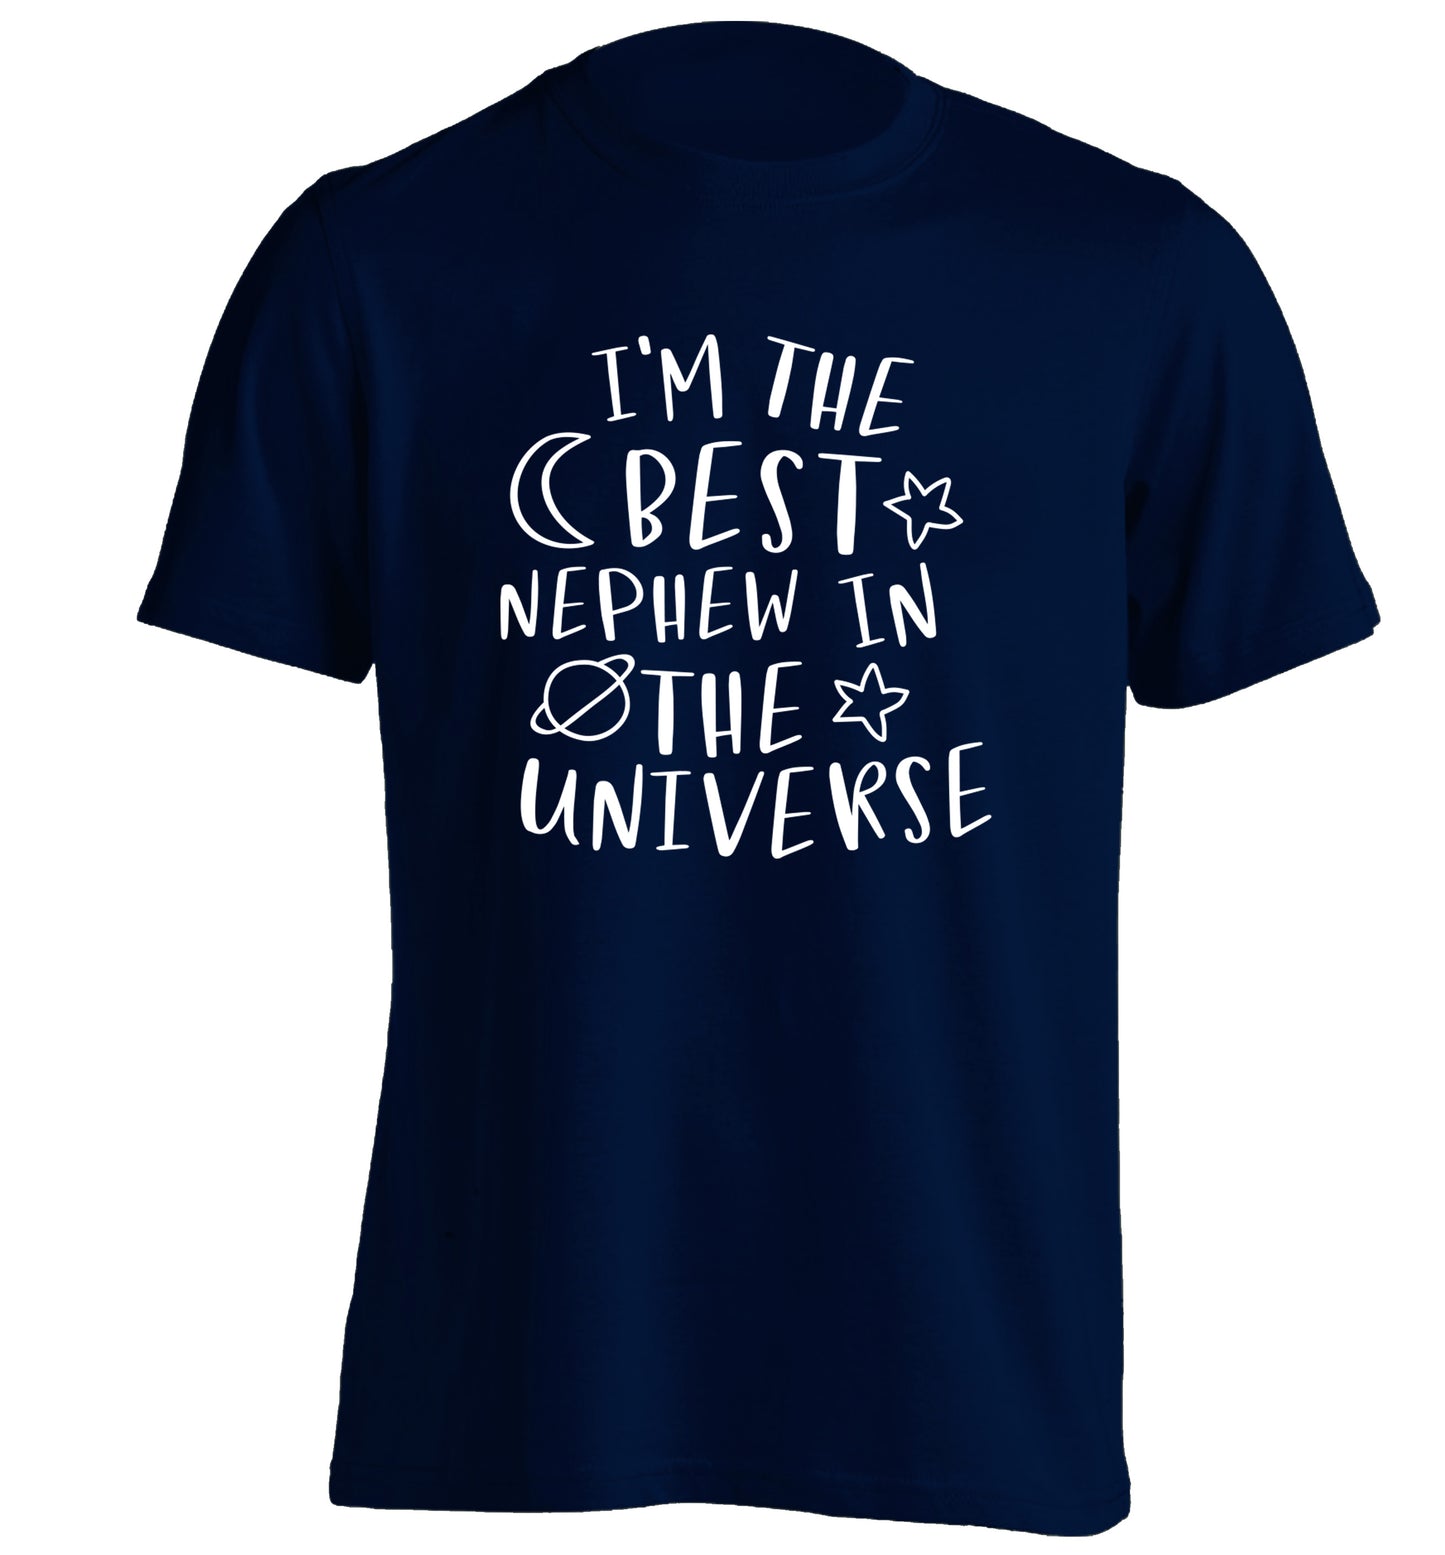 I'm the best nephew in the universe adults unisex navy Tshirt 2XL